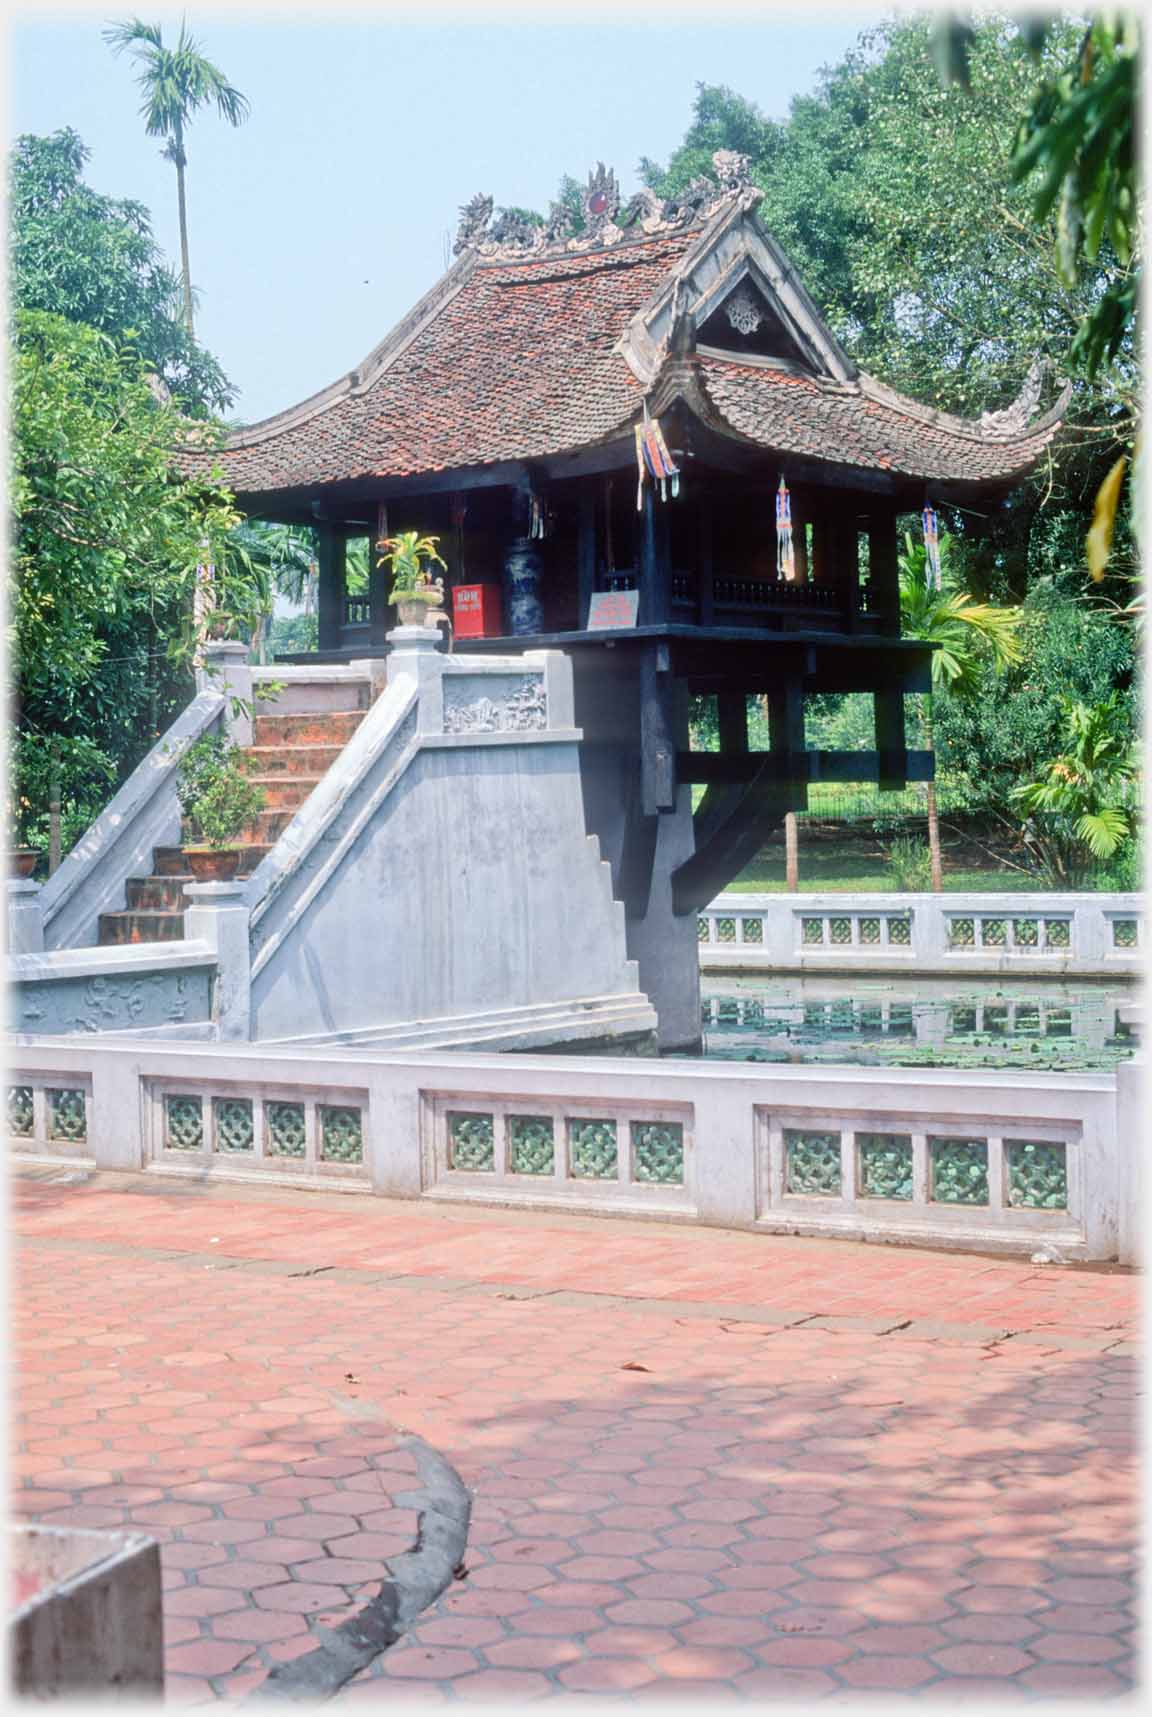 Paved area with no flowrs in front of balustrade, pagoda beyond.